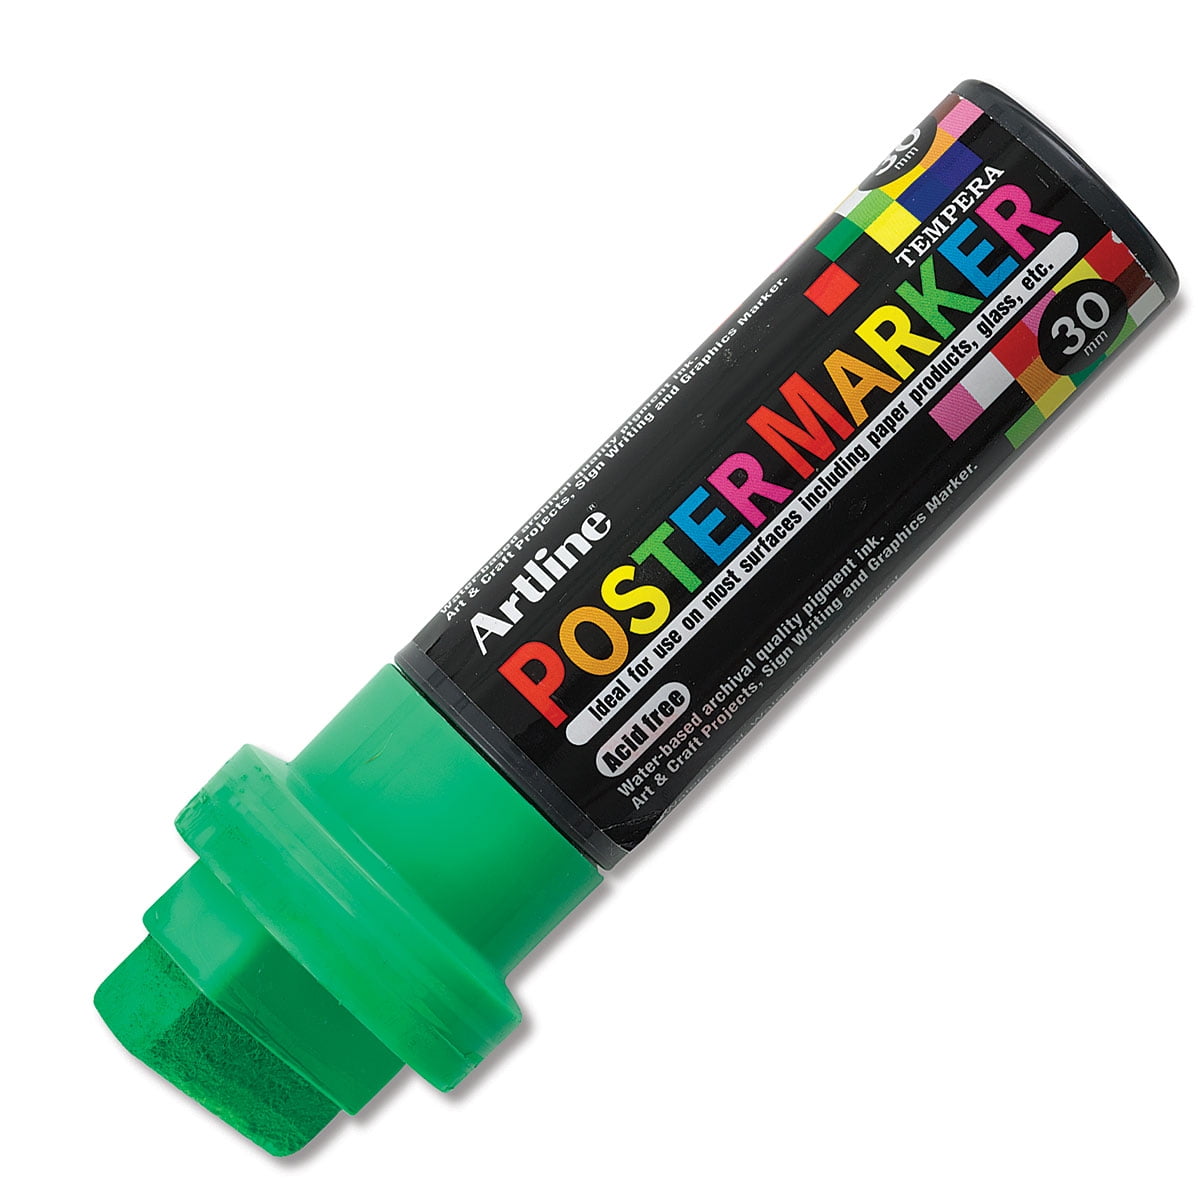 Artline 30mm Chisel Poster Markers - Sold by the Dozen